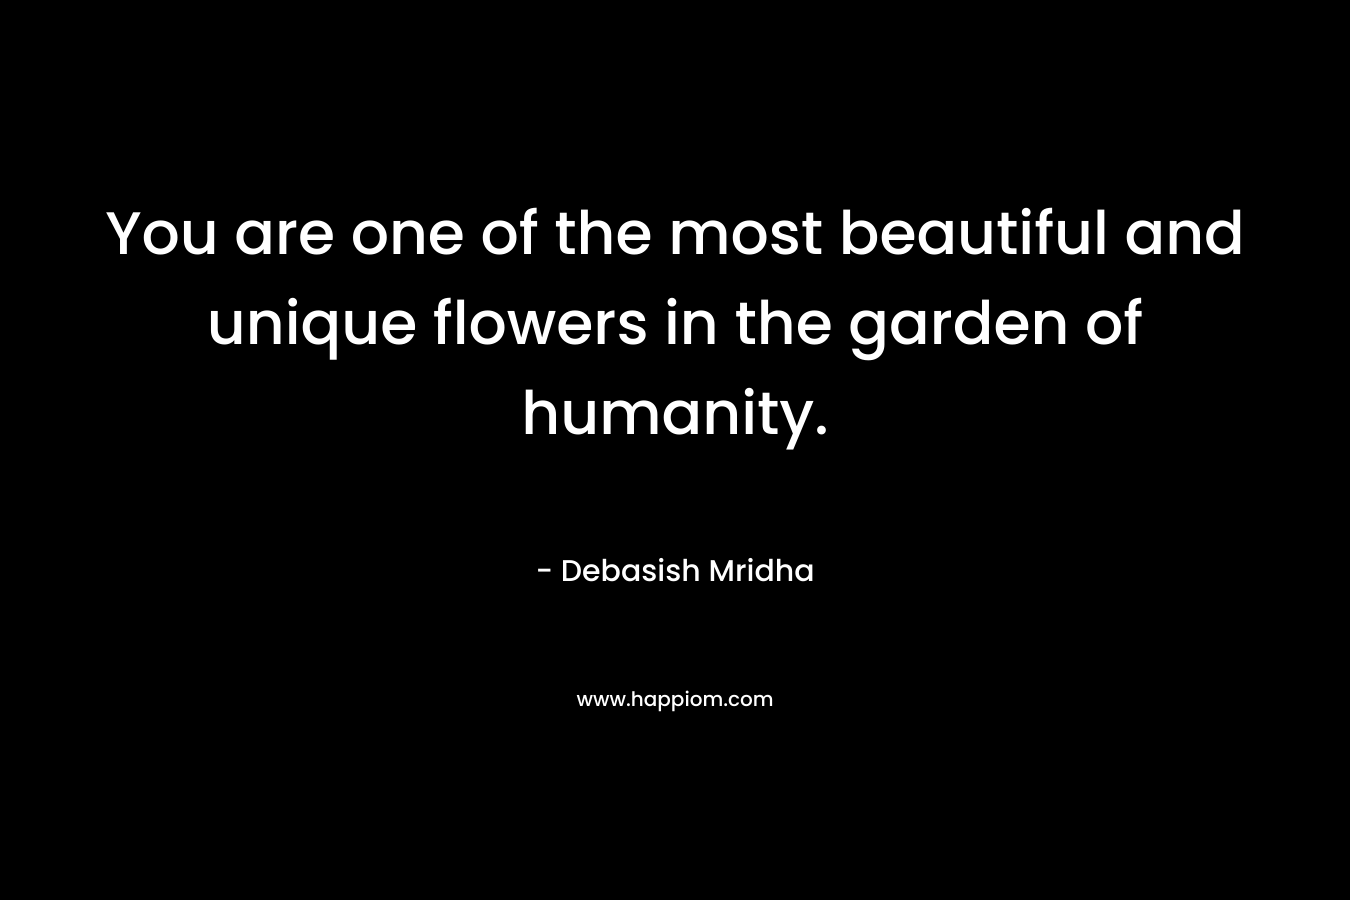 You are one of the most beautiful and unique flowers in the garden of humanity.